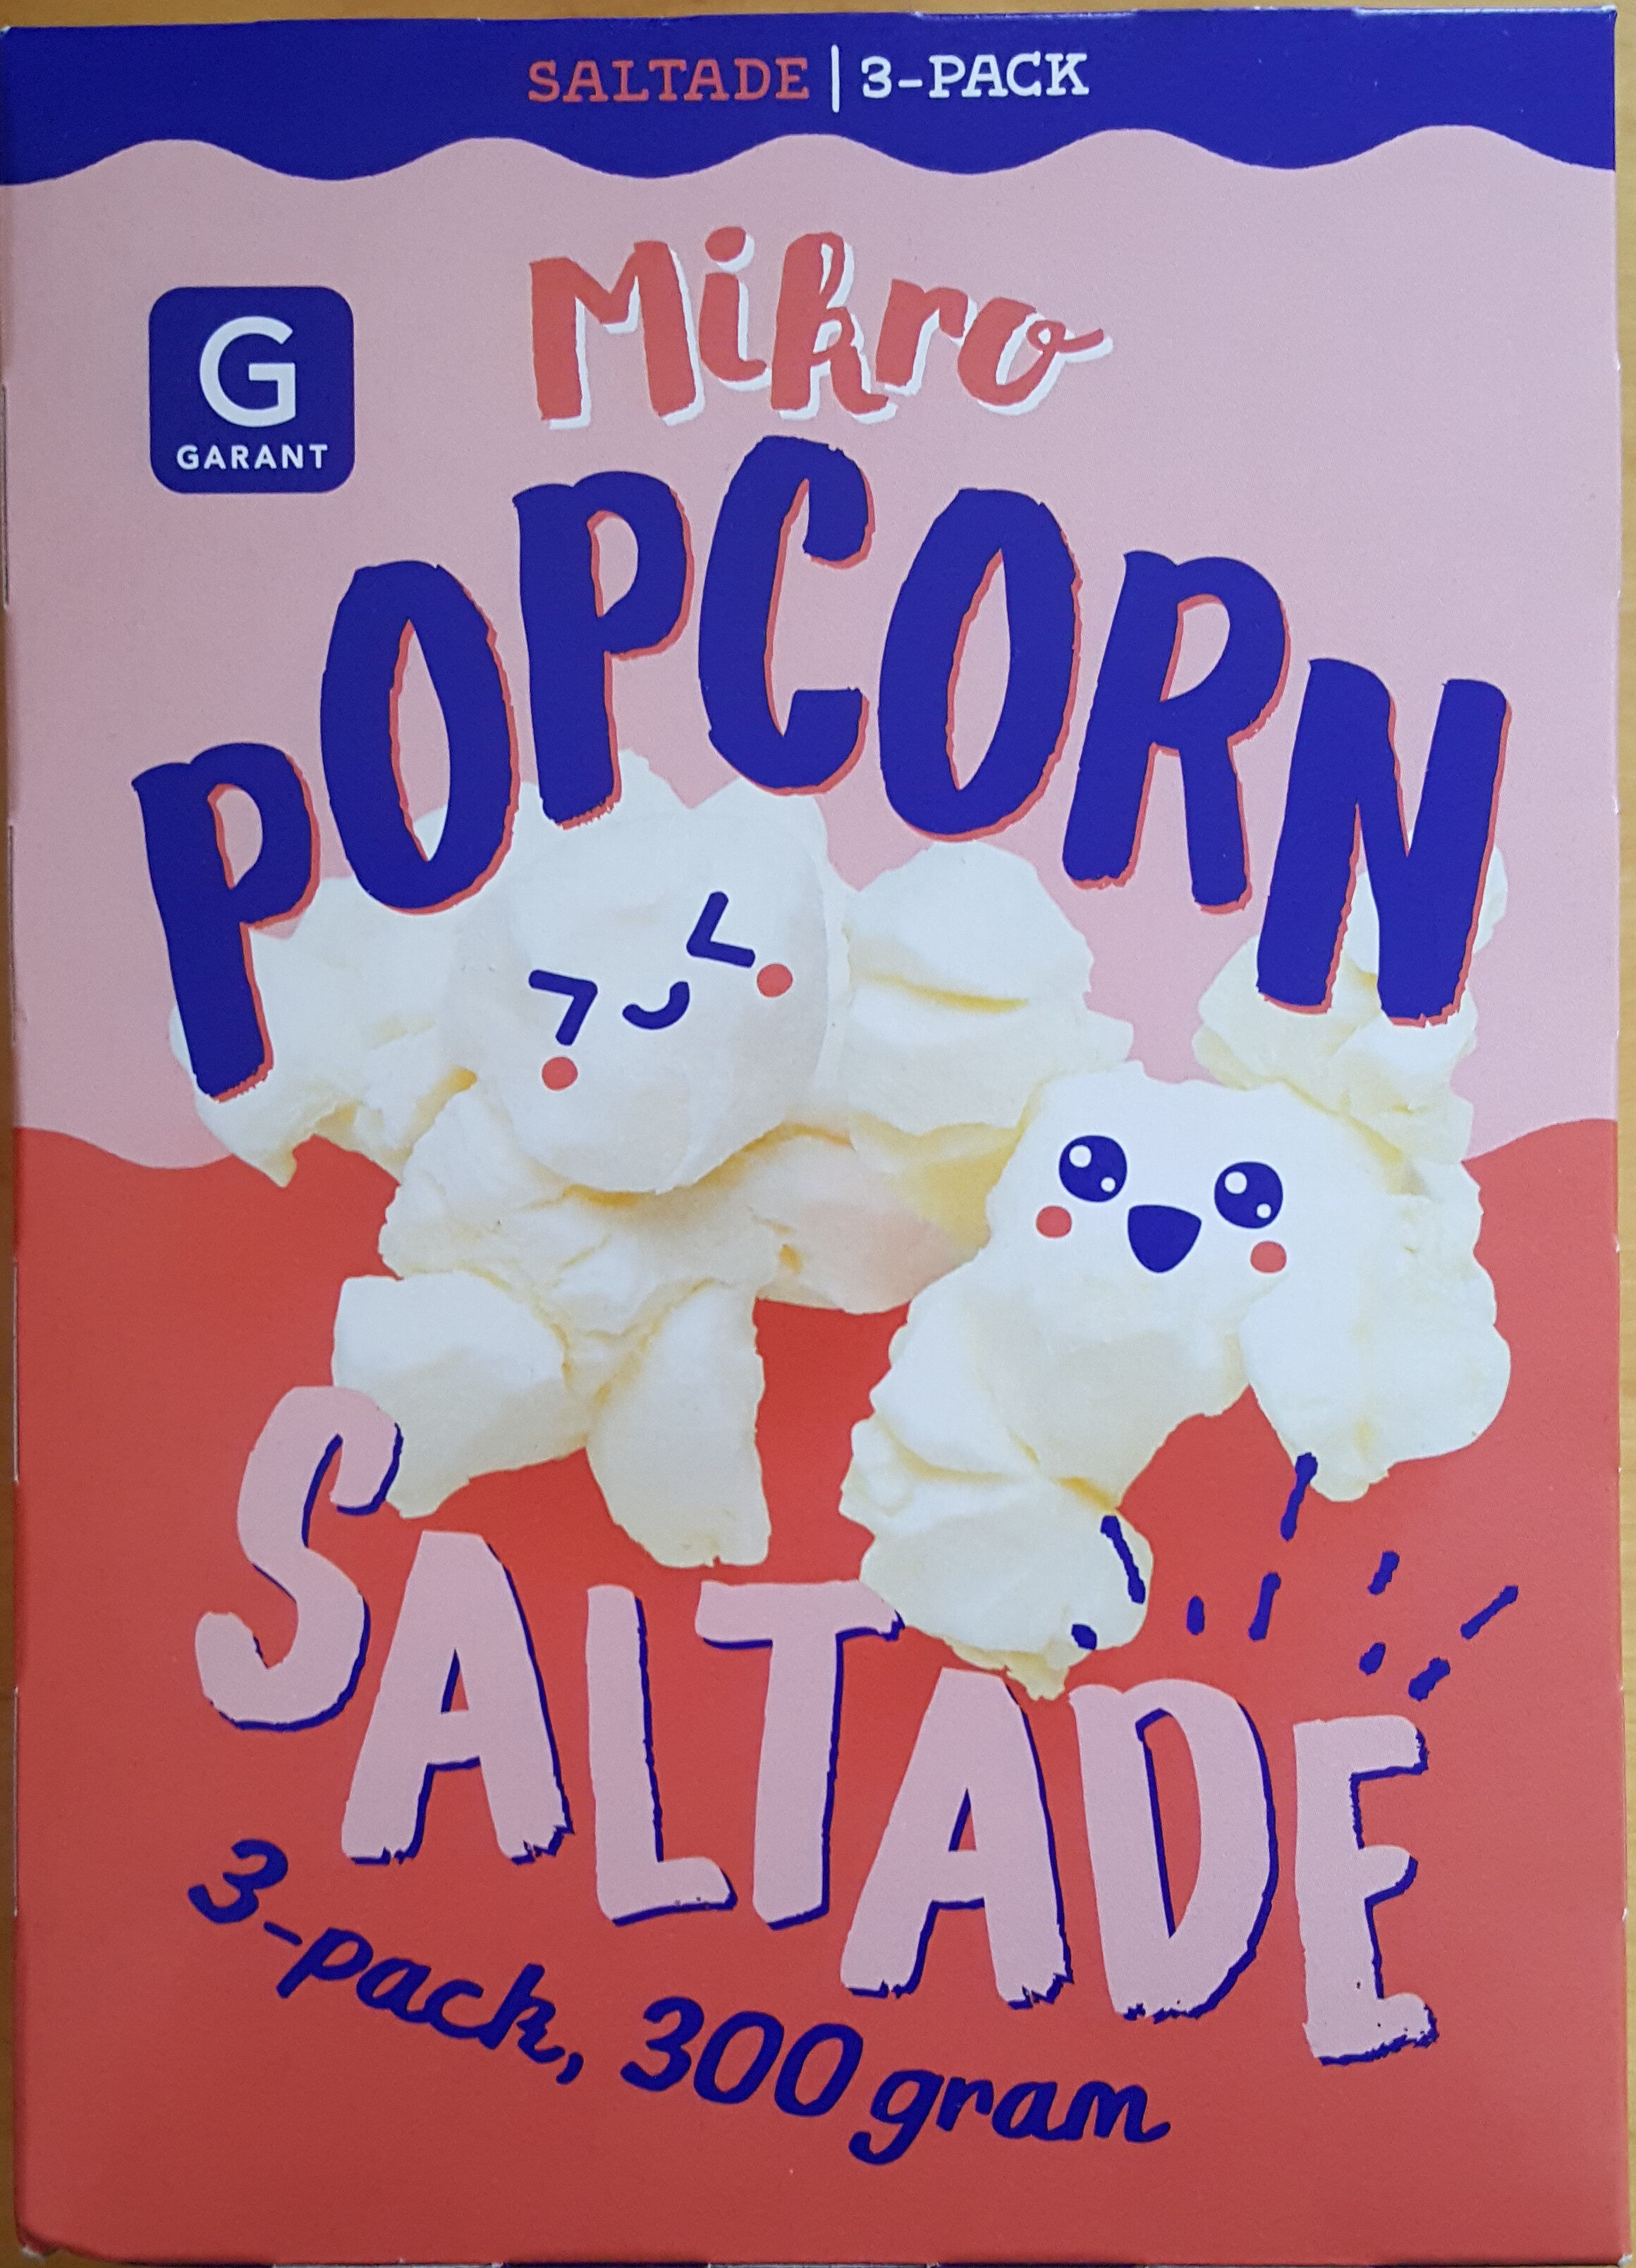 Micropopcorn - Saltade, 3-pack - Product - sv